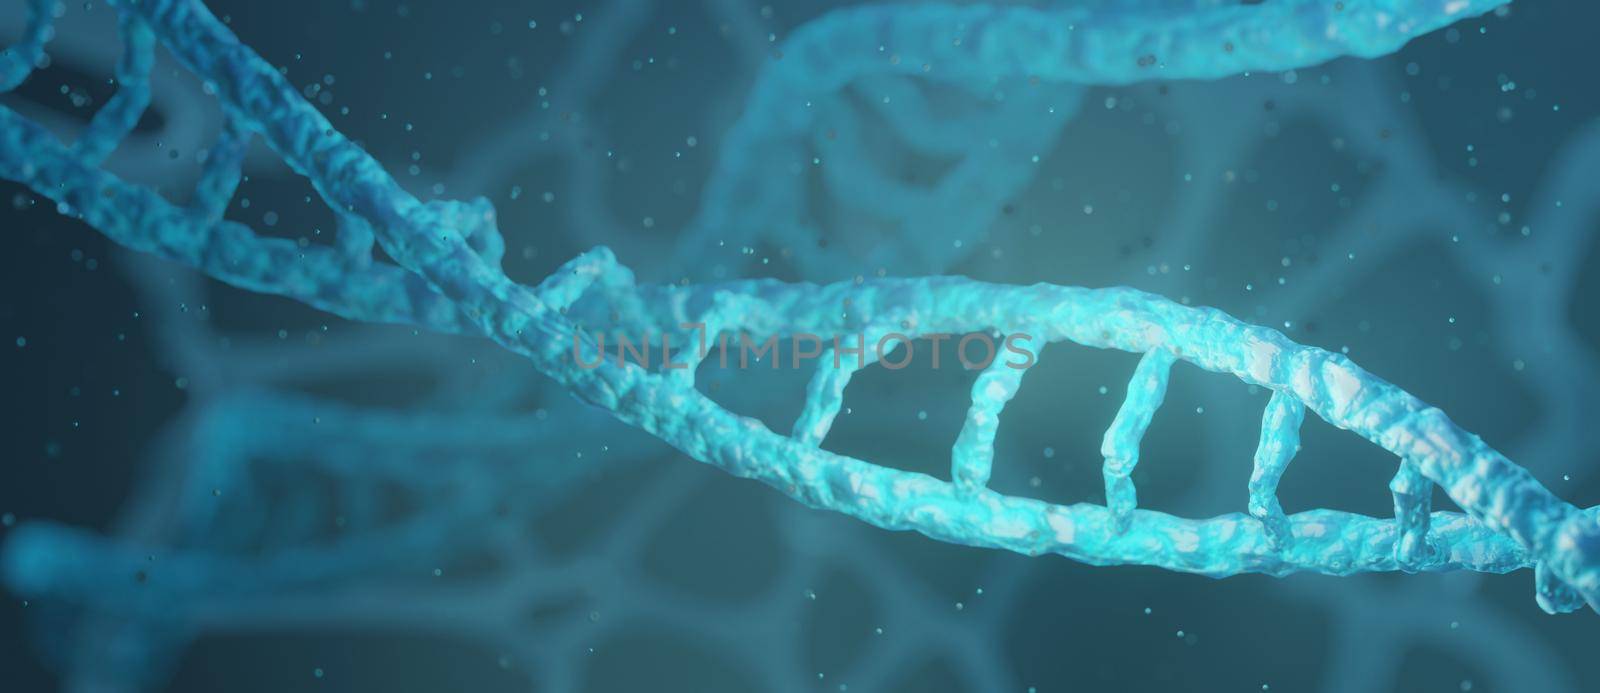 DNA structure, abstract background panorama wallpaper 3D Render by yay_lmrb